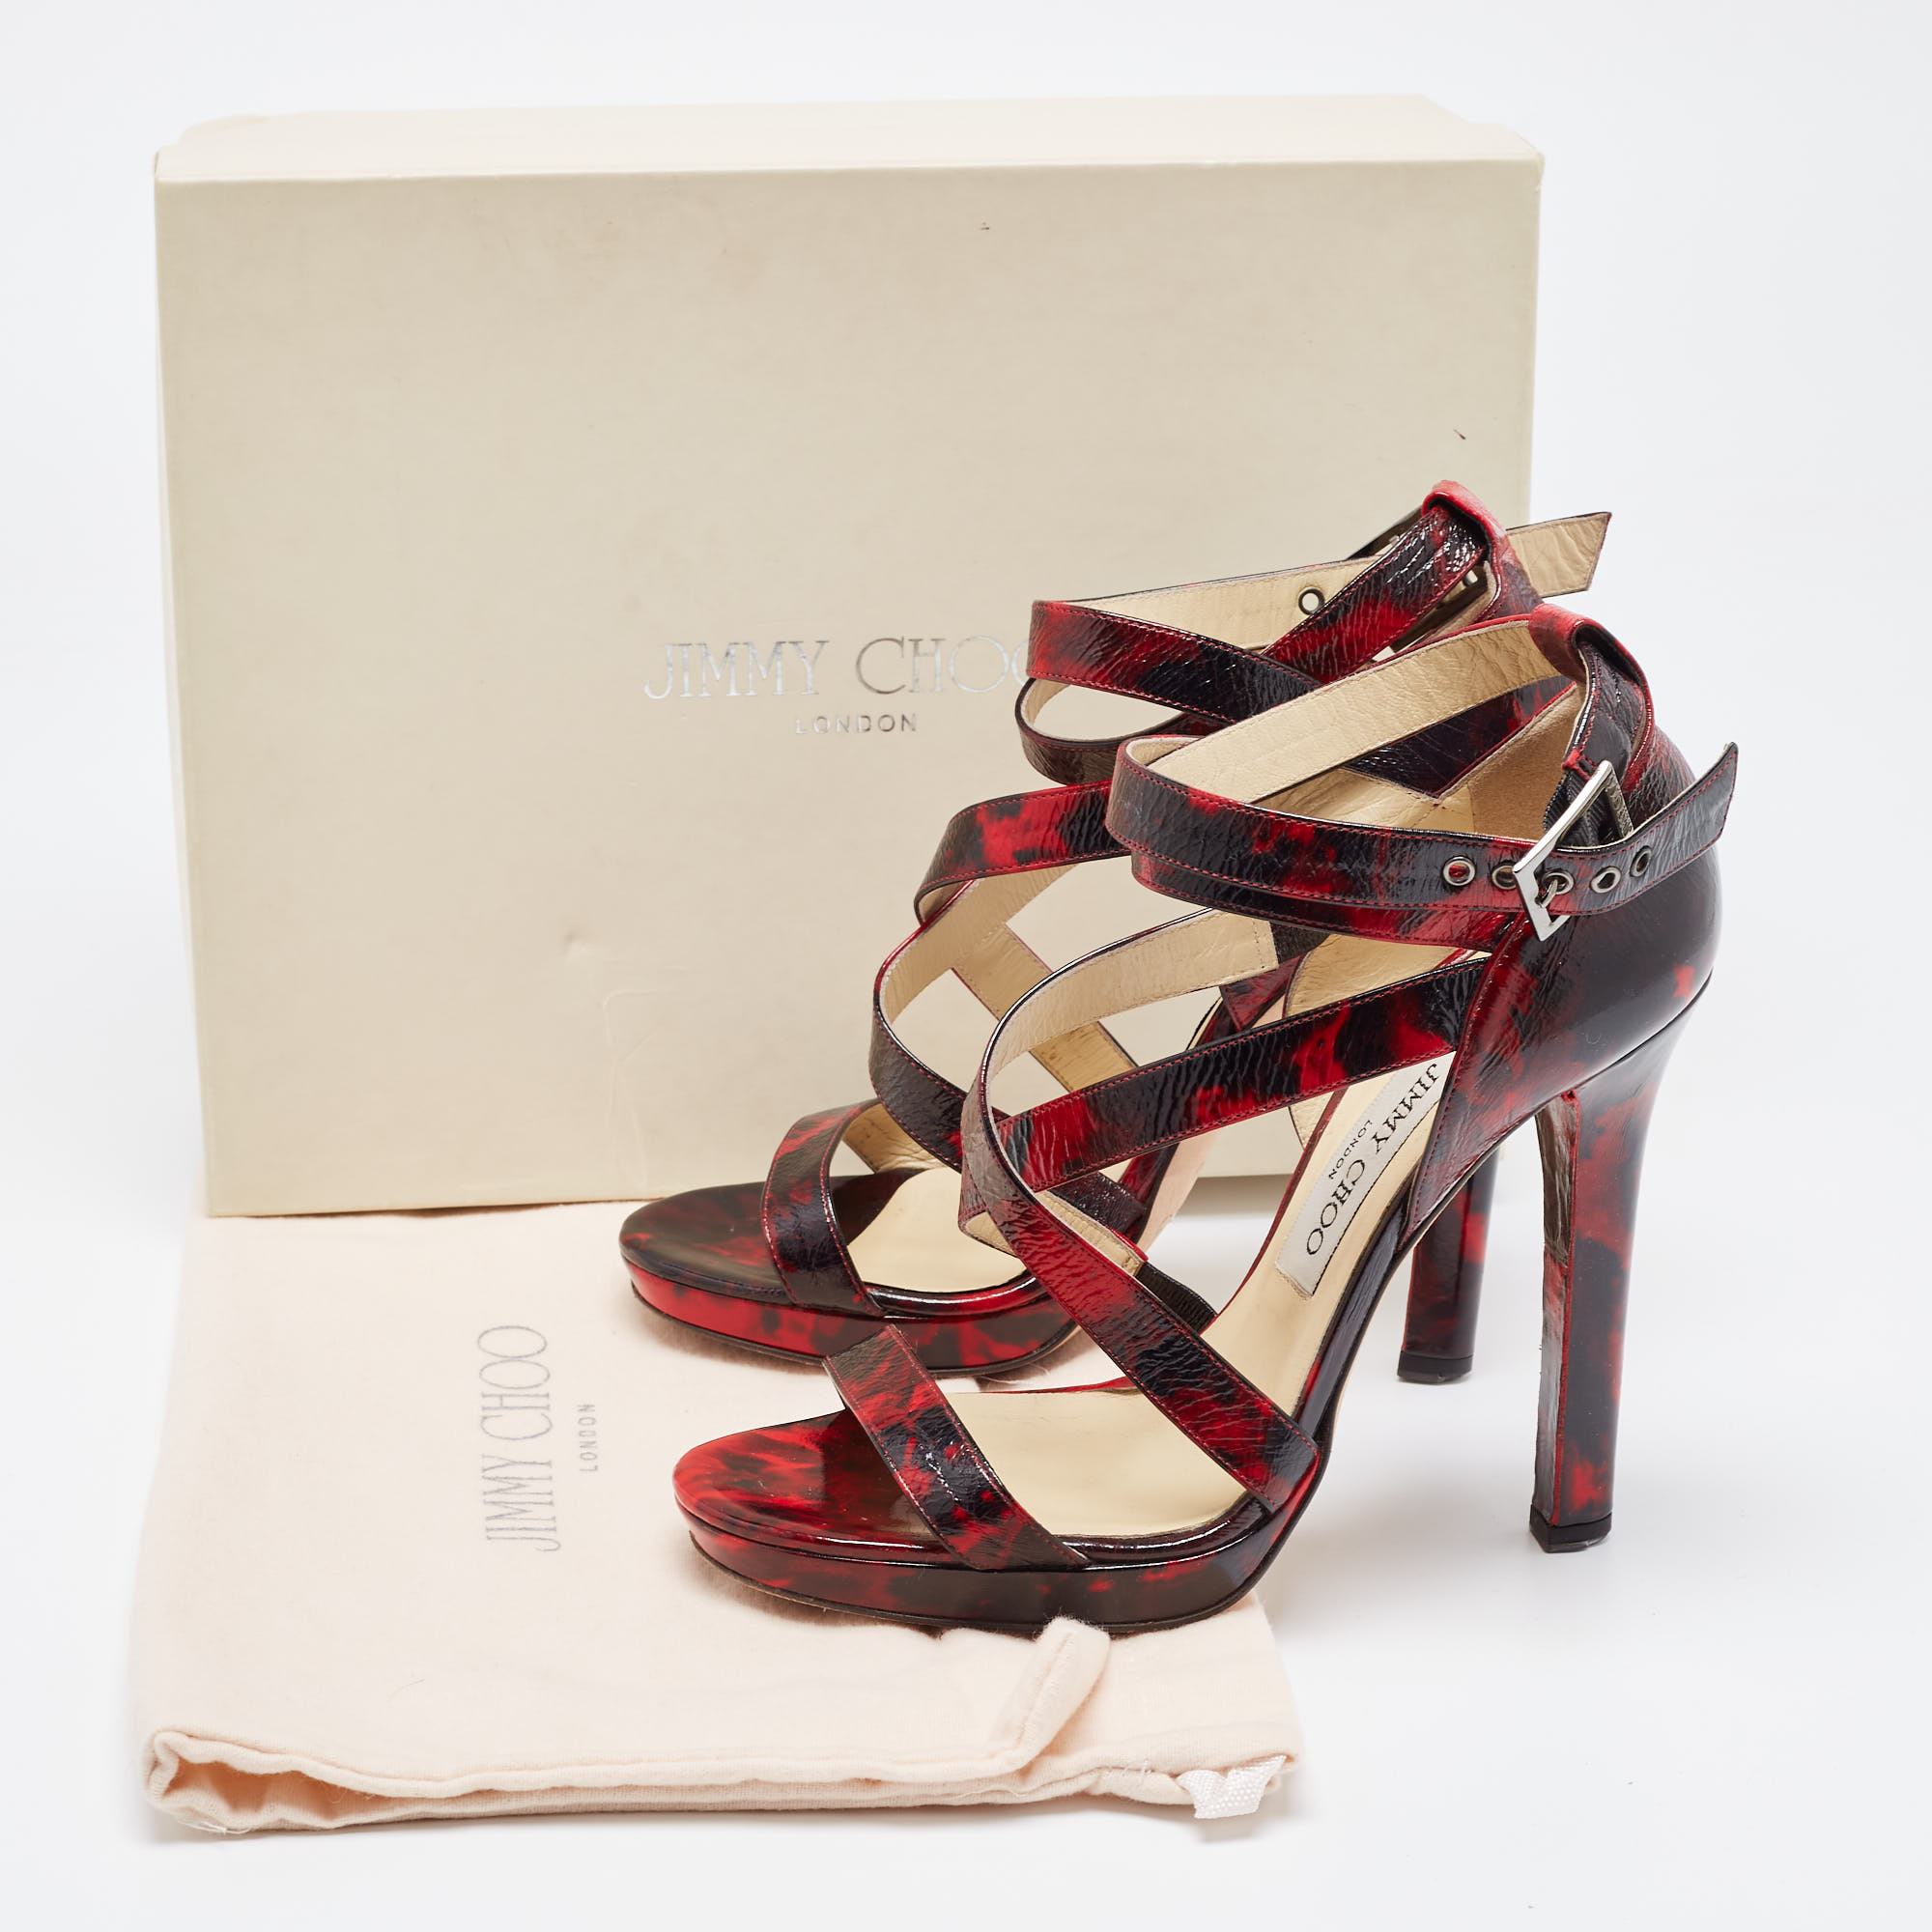 Jimmy Choo Red/Black Leather Criss Cross Ankle Strap Sandals Size 37.5